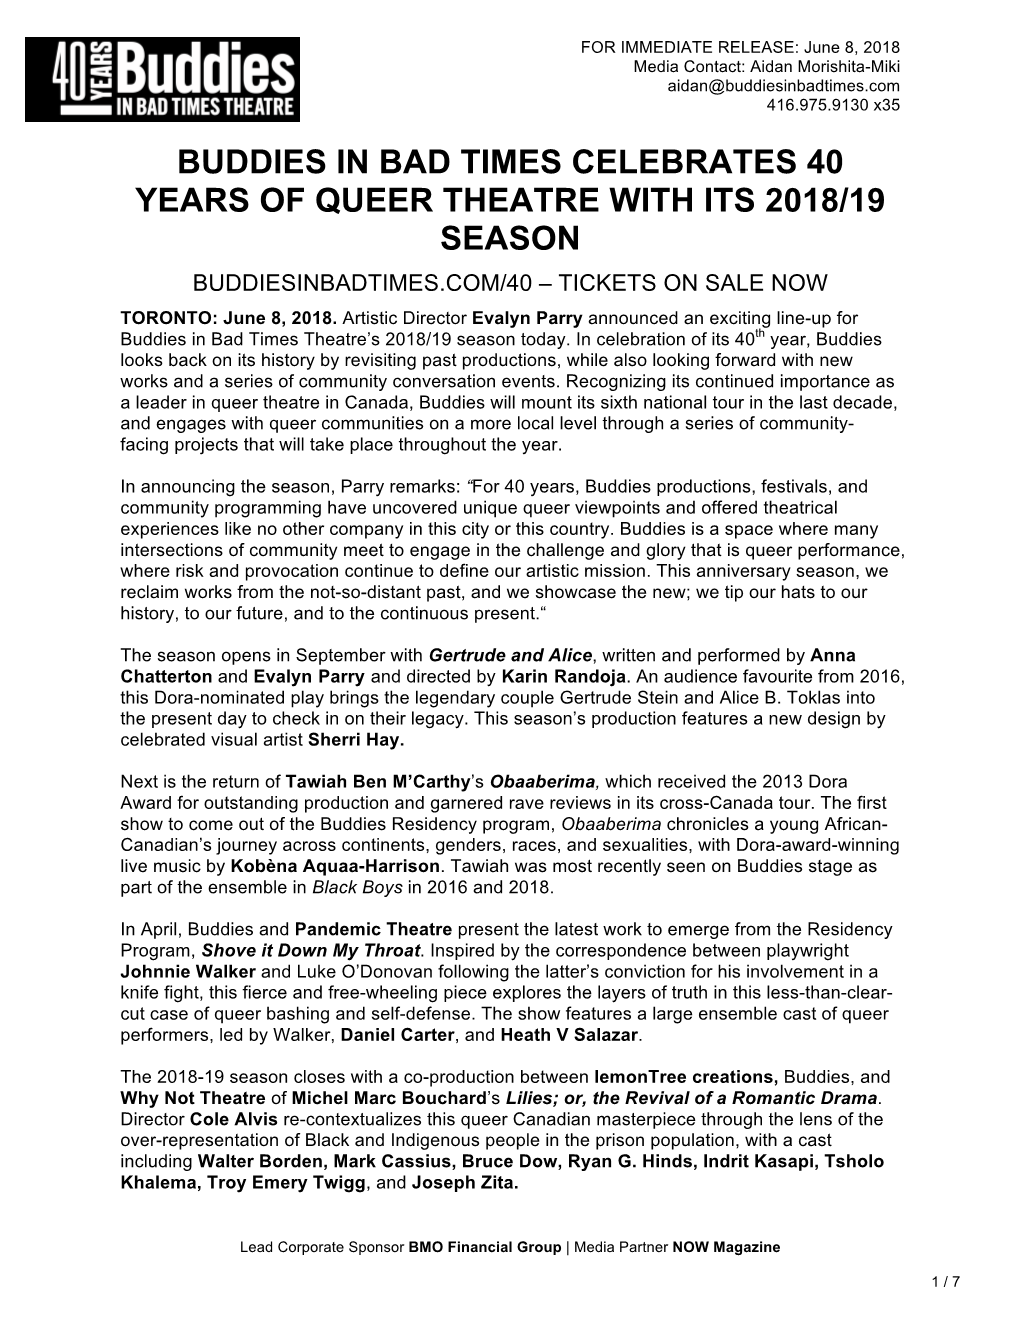 Buddies in Bad Times Celebrates 40 Years of Queer Theatre with Its 2018/19 Season